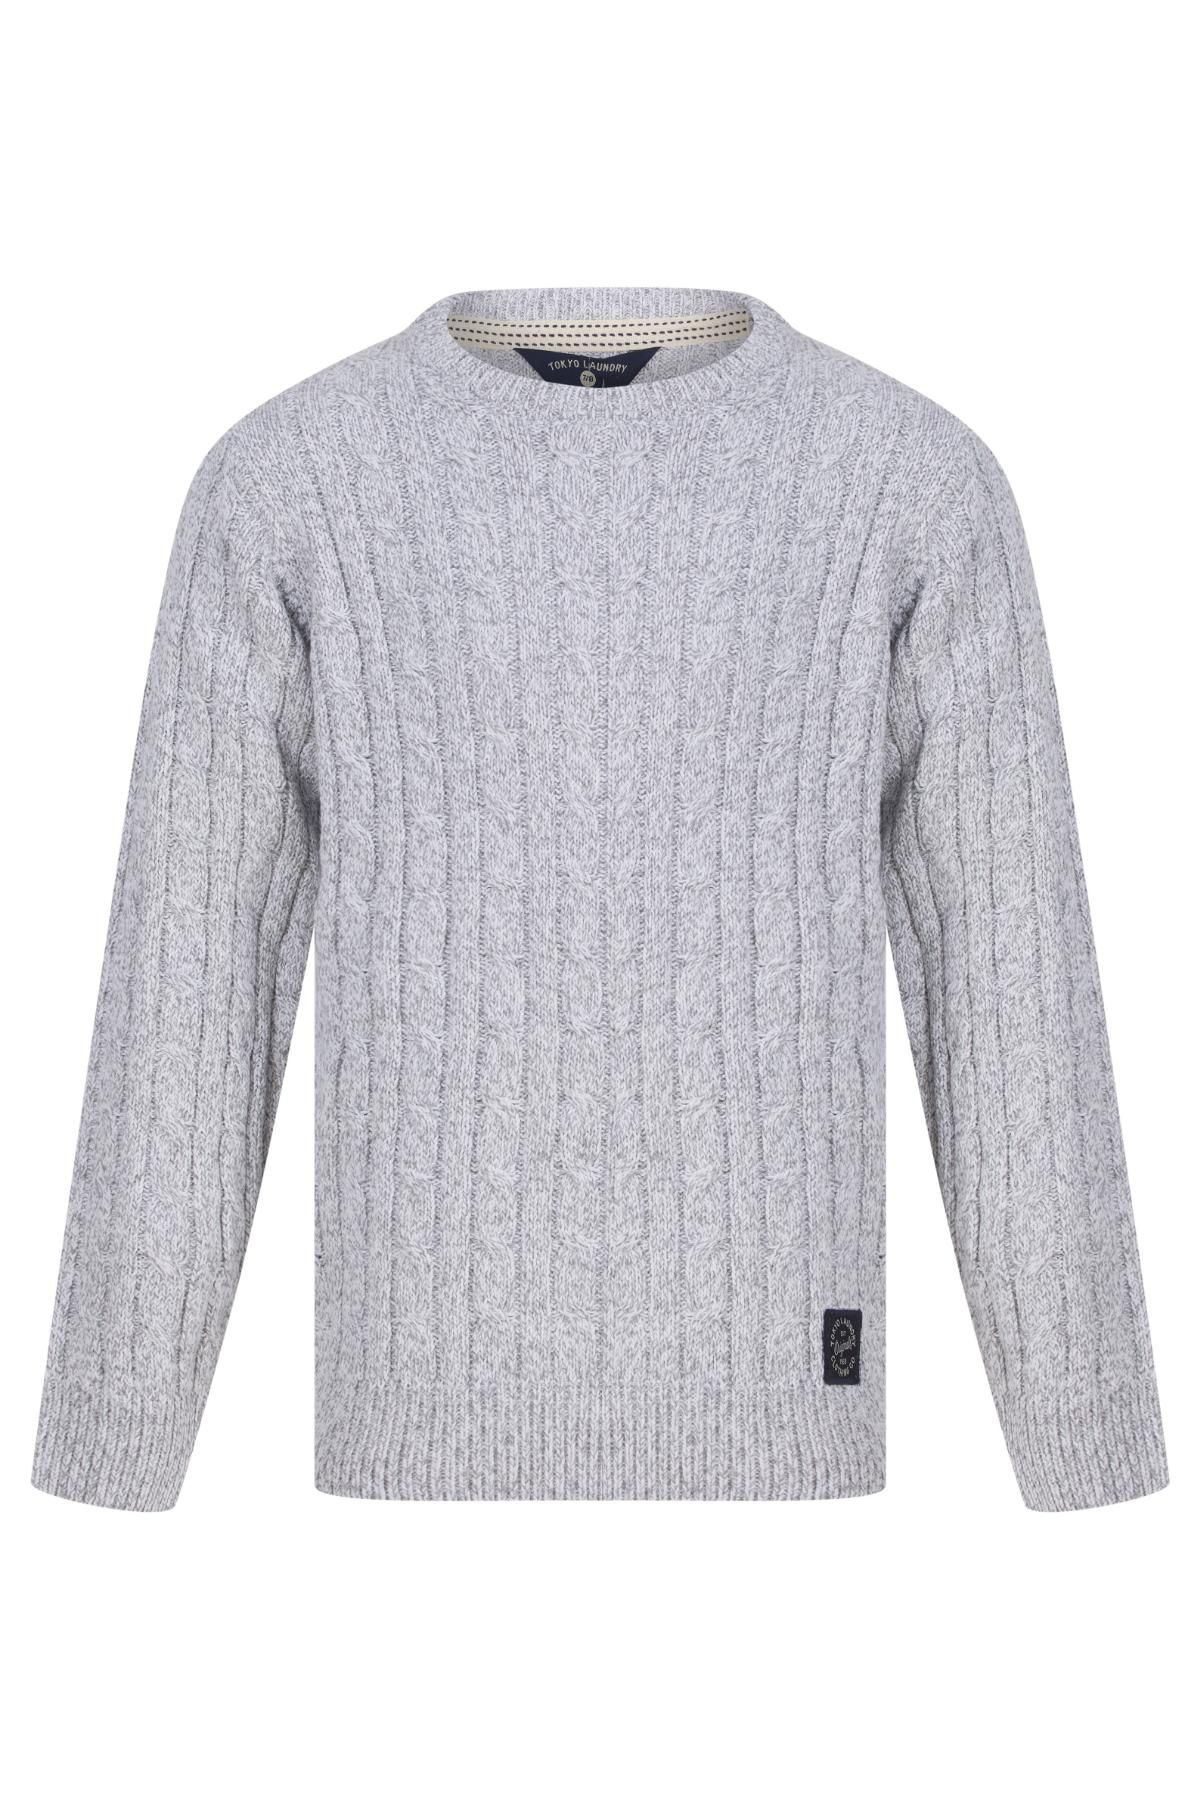 Tokyo Laundry Boys Knitted Jumper Grey